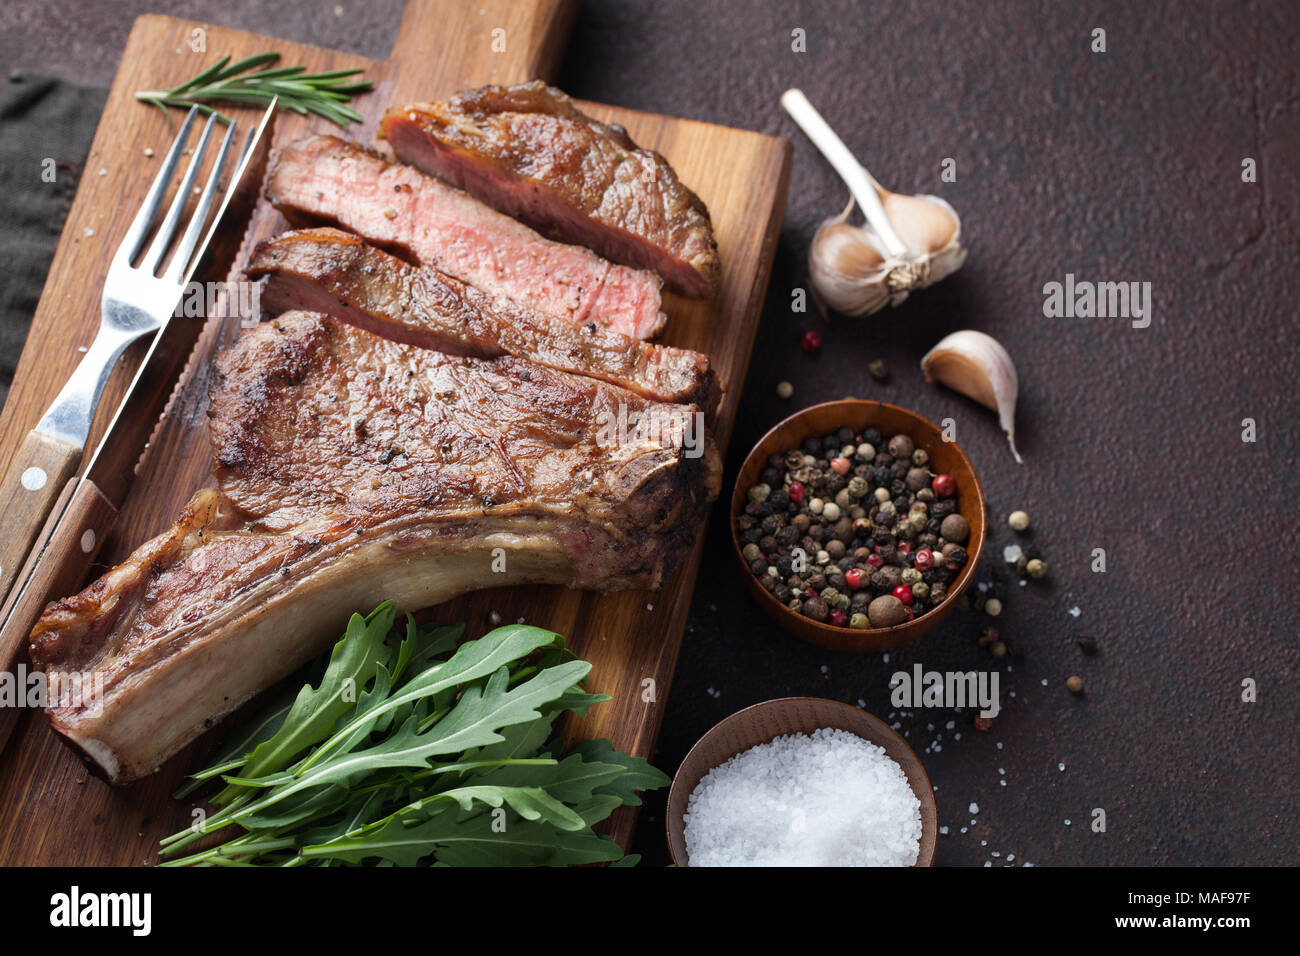 Grilled cowboy beef steak, herbs and spices on a dark stone background. Top view. Stock Photo